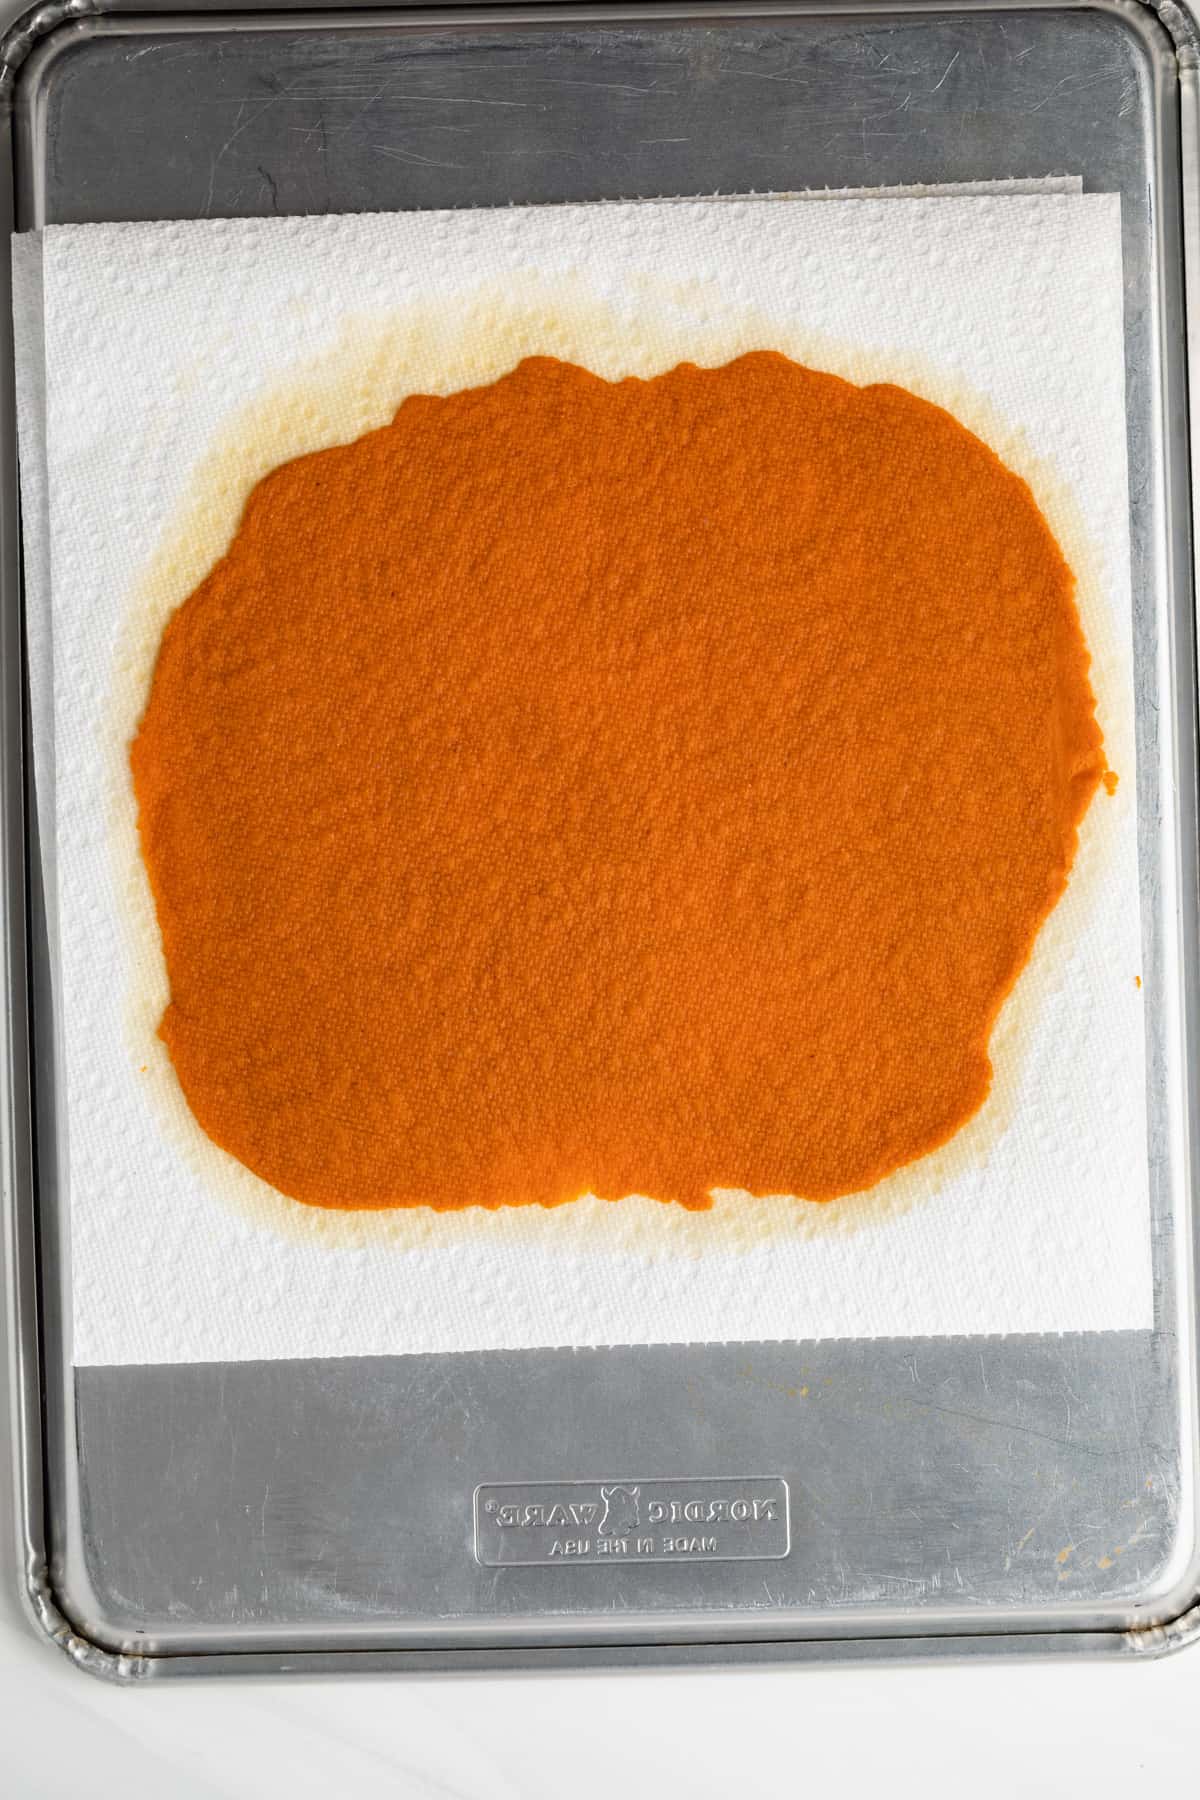 Pumpkin puree between two layers of paper towels